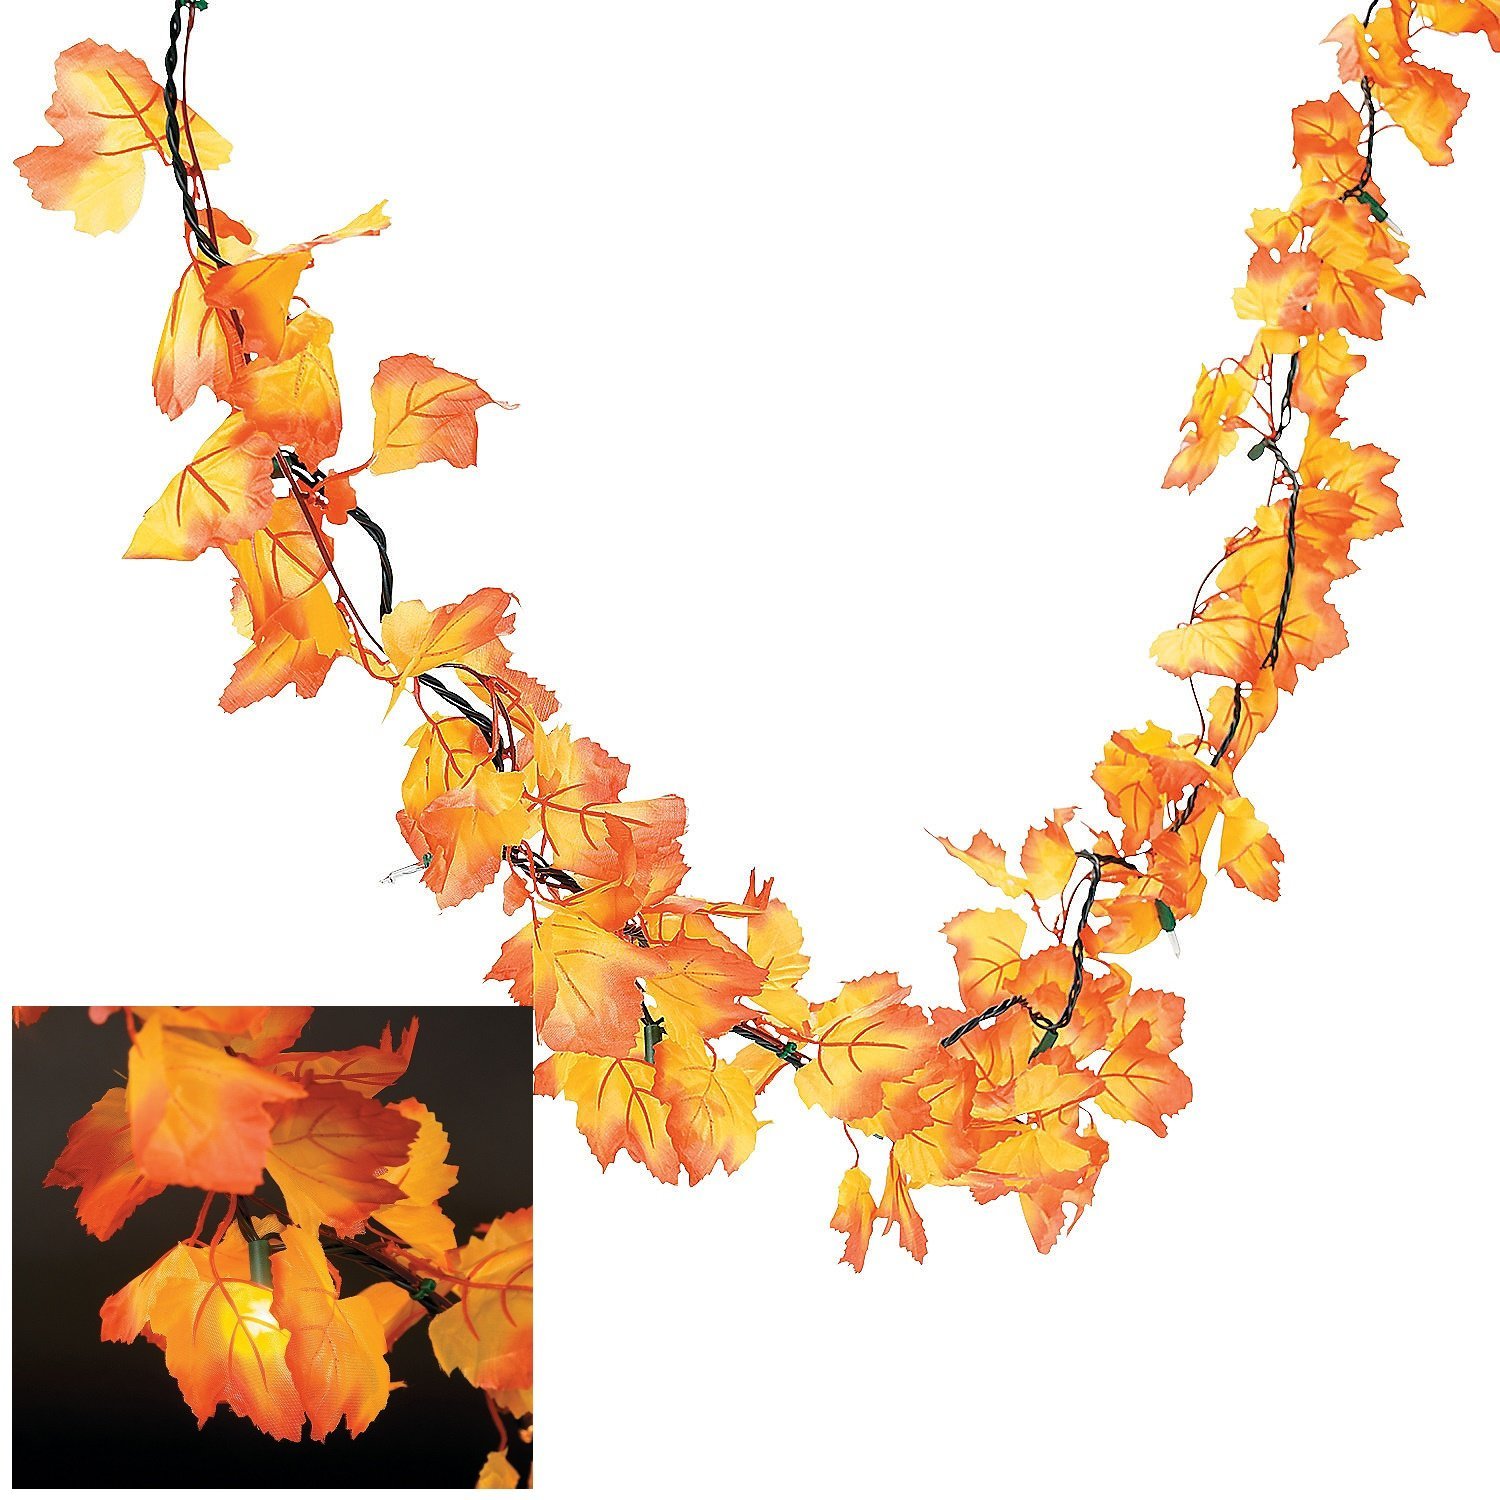 Amazon.com: Autumn Leaves Lighted Garland - Wreaths and Floral ...